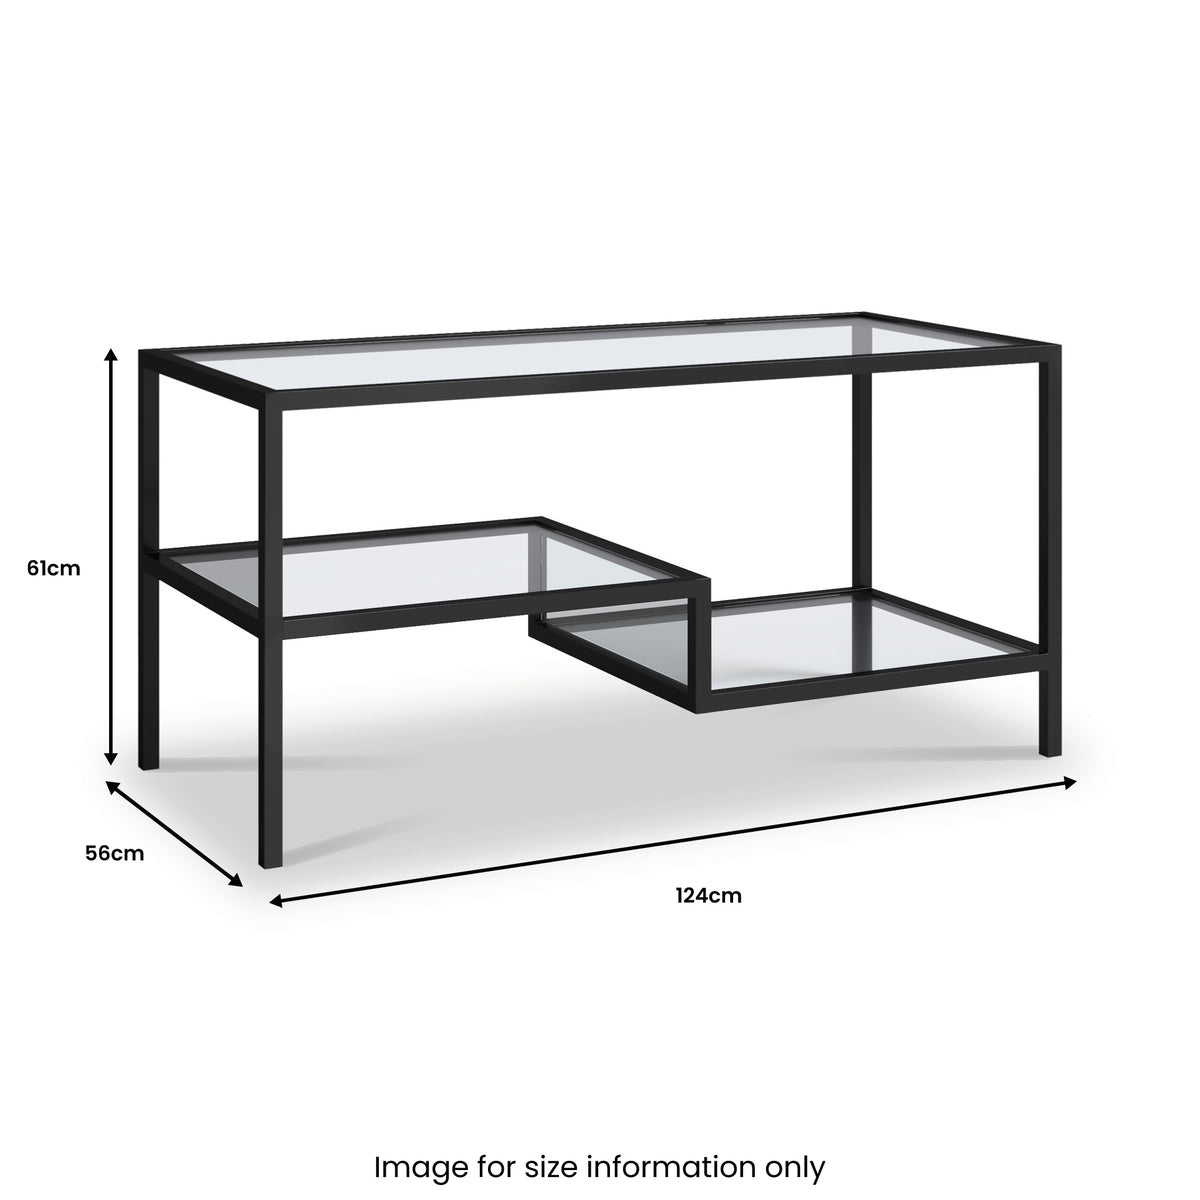 Miguel Iron 3 Tier Coffee Table dimensions